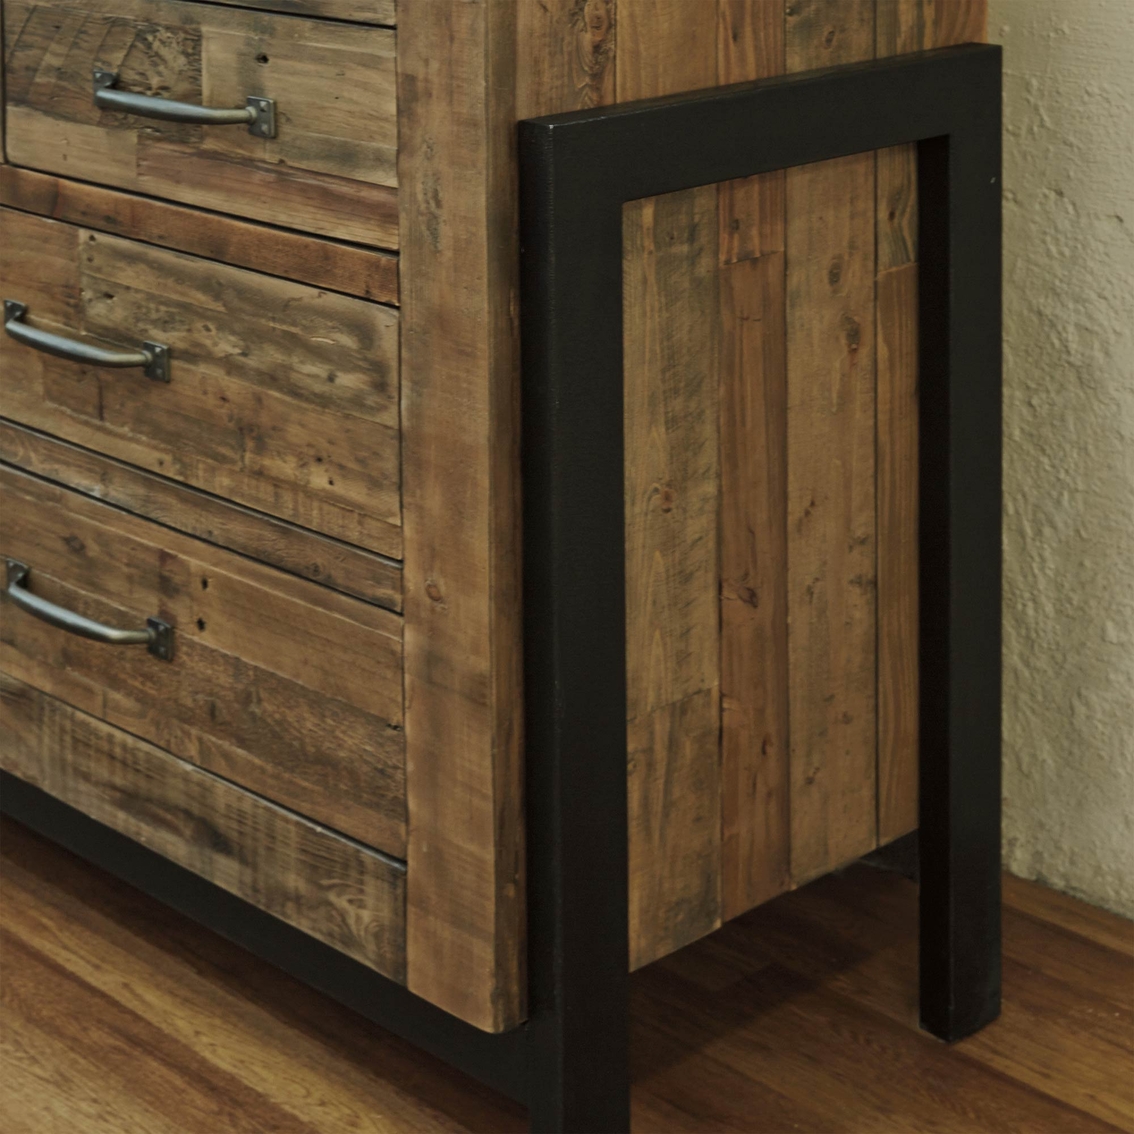 Signature Design by Ashley Sommerford Five Drawer Chest - Image 3 of 4